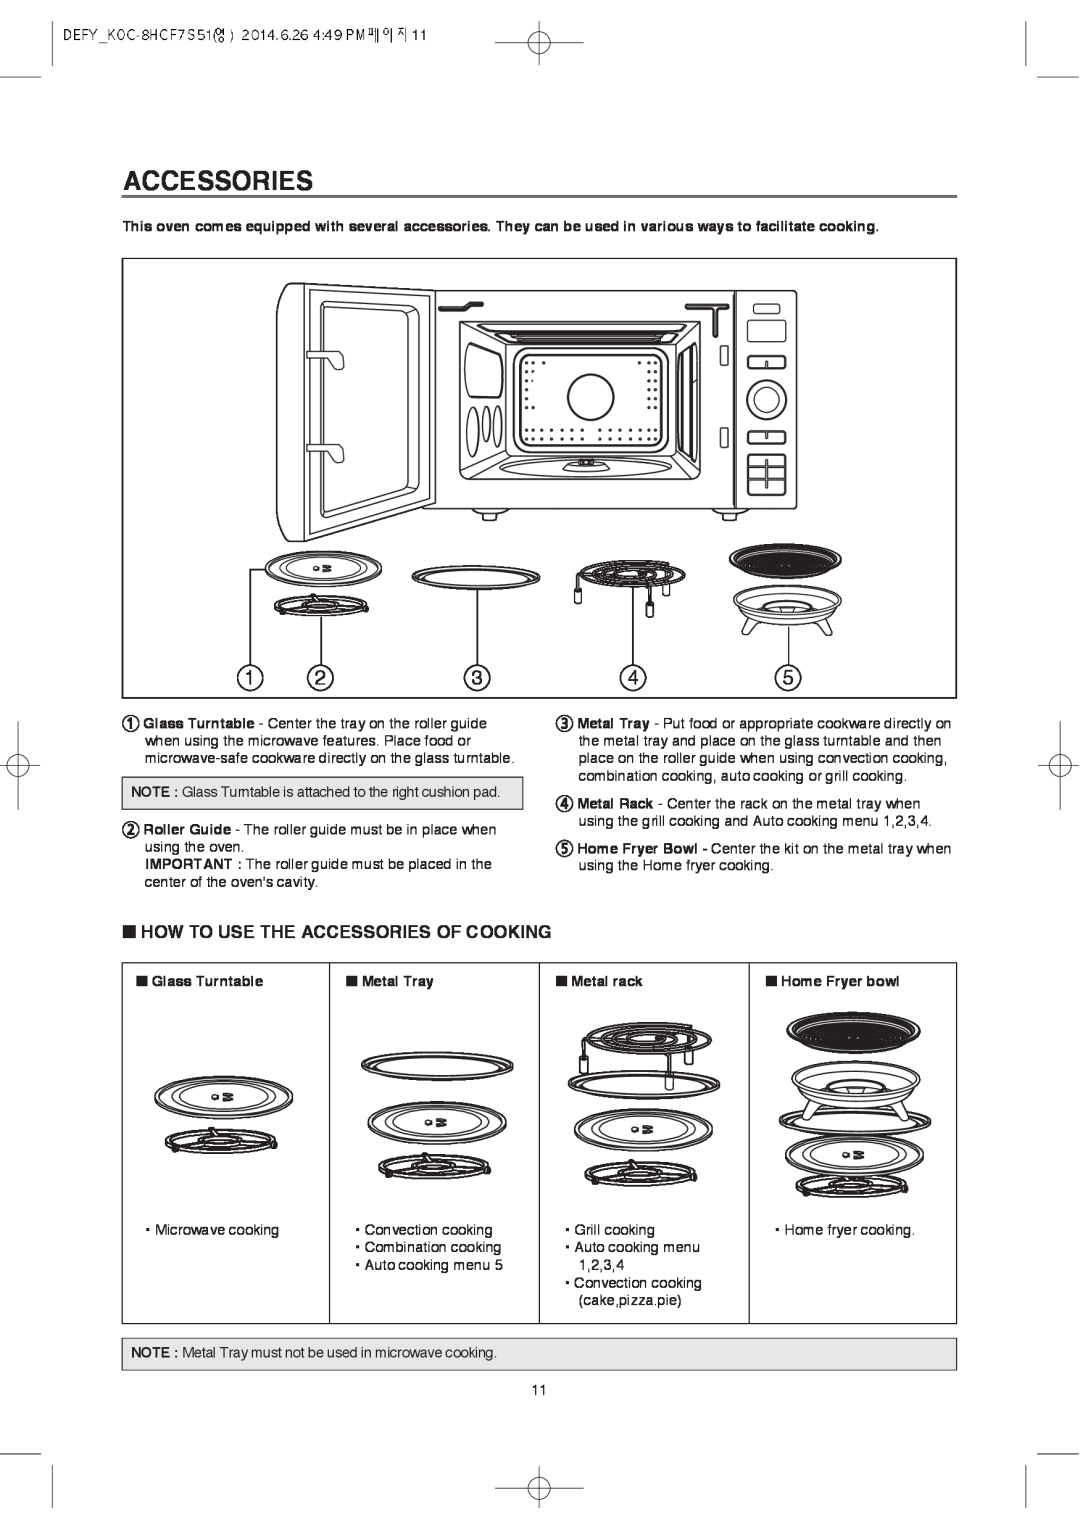 Defy Appliances MWA 2434 MM user manual How To Use The Accessories Of Cooking 